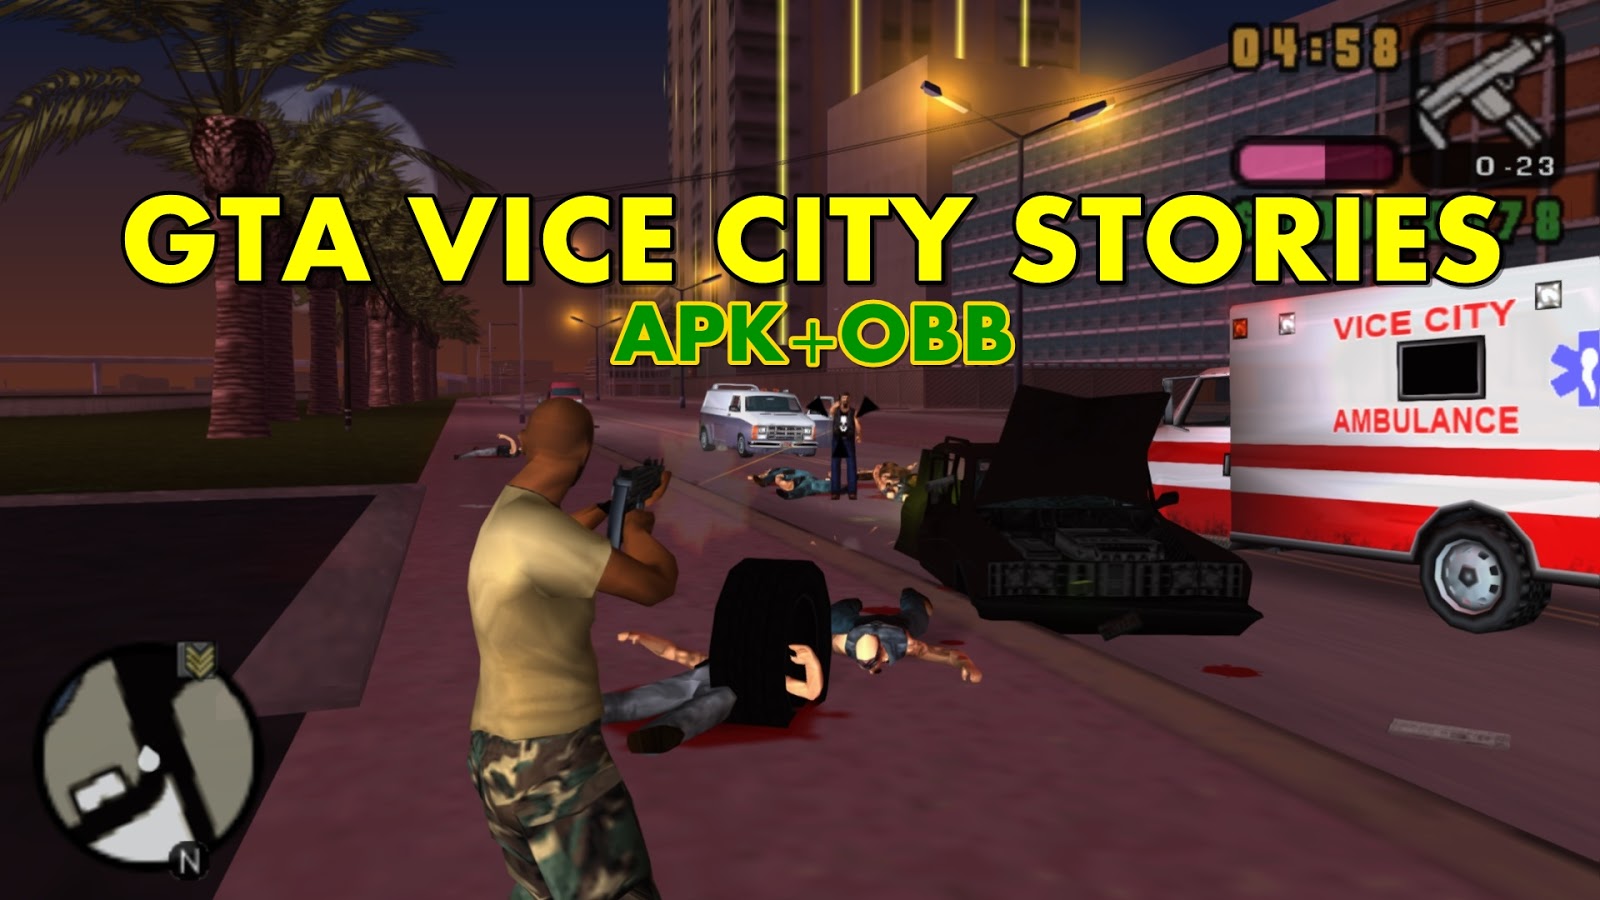 gta san andreas obb download for android